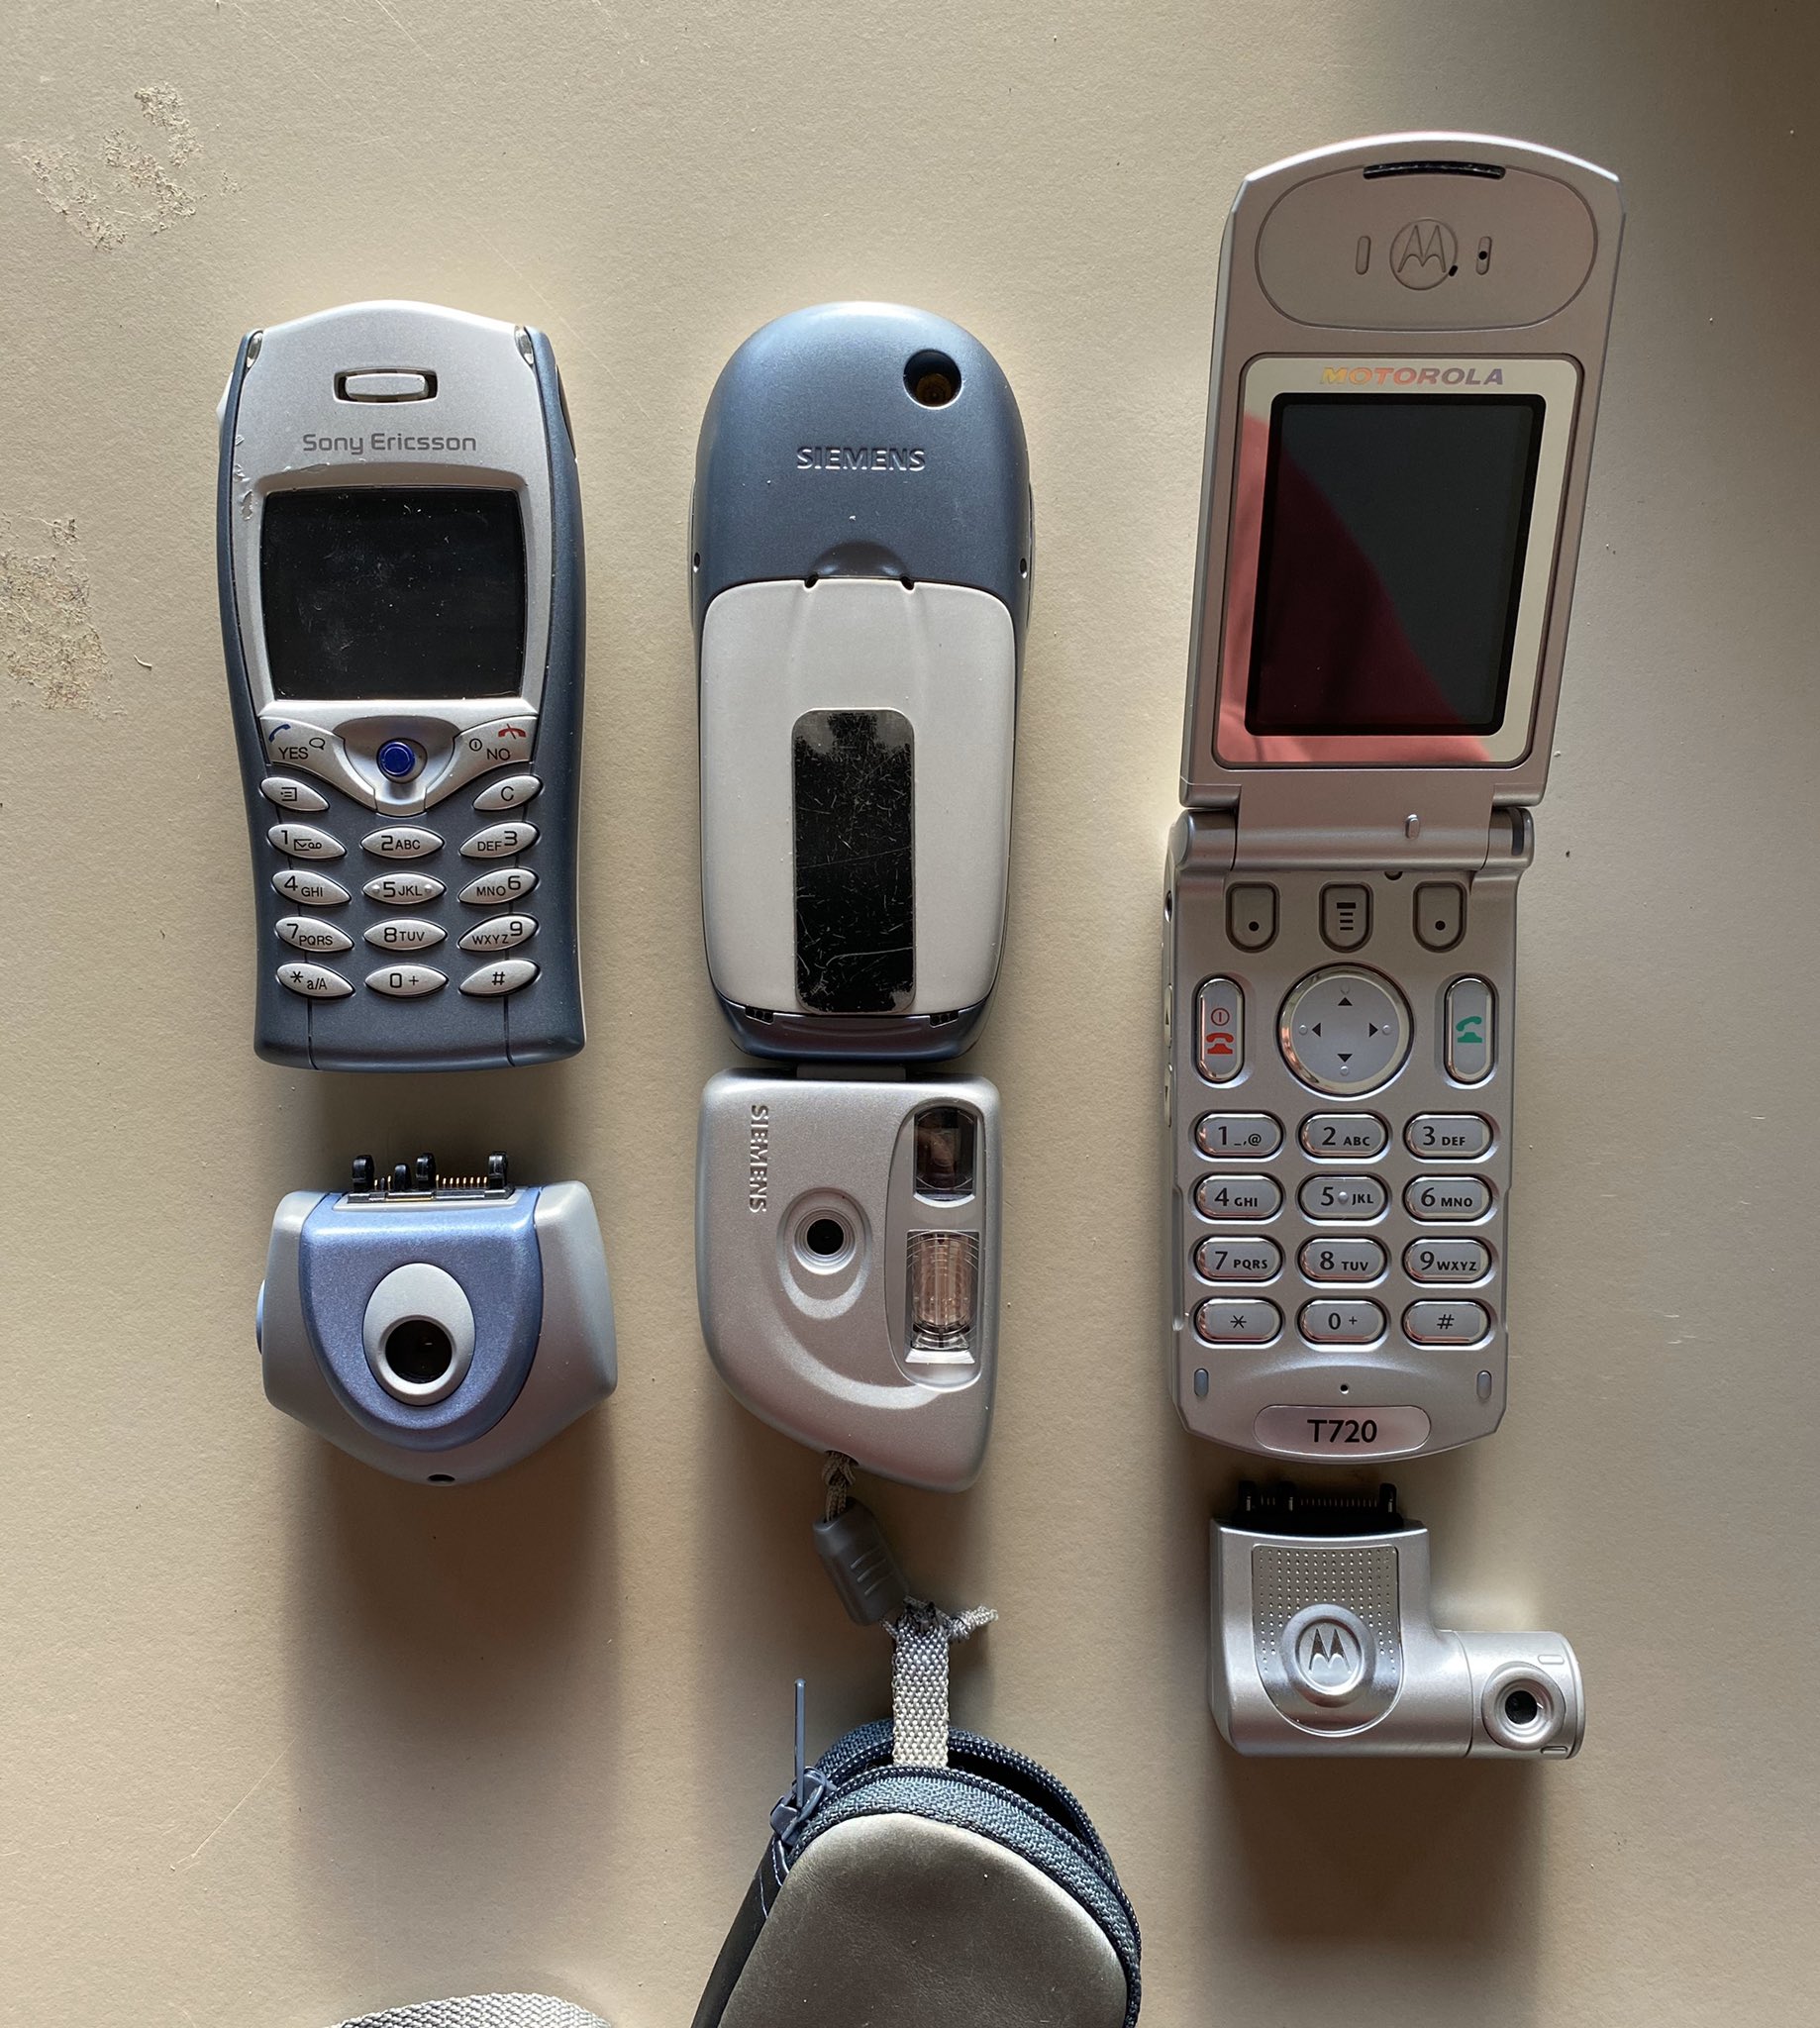 native lekkage ontwerp Ben Wood on Twitter: "@EEkevwil @SonyMobileNews @Moto Ericsson T68 was such  a breakthrough product. I remember seeing it at CeBIT in 2001 (Steve Walker  showed it to me). The colour screen was